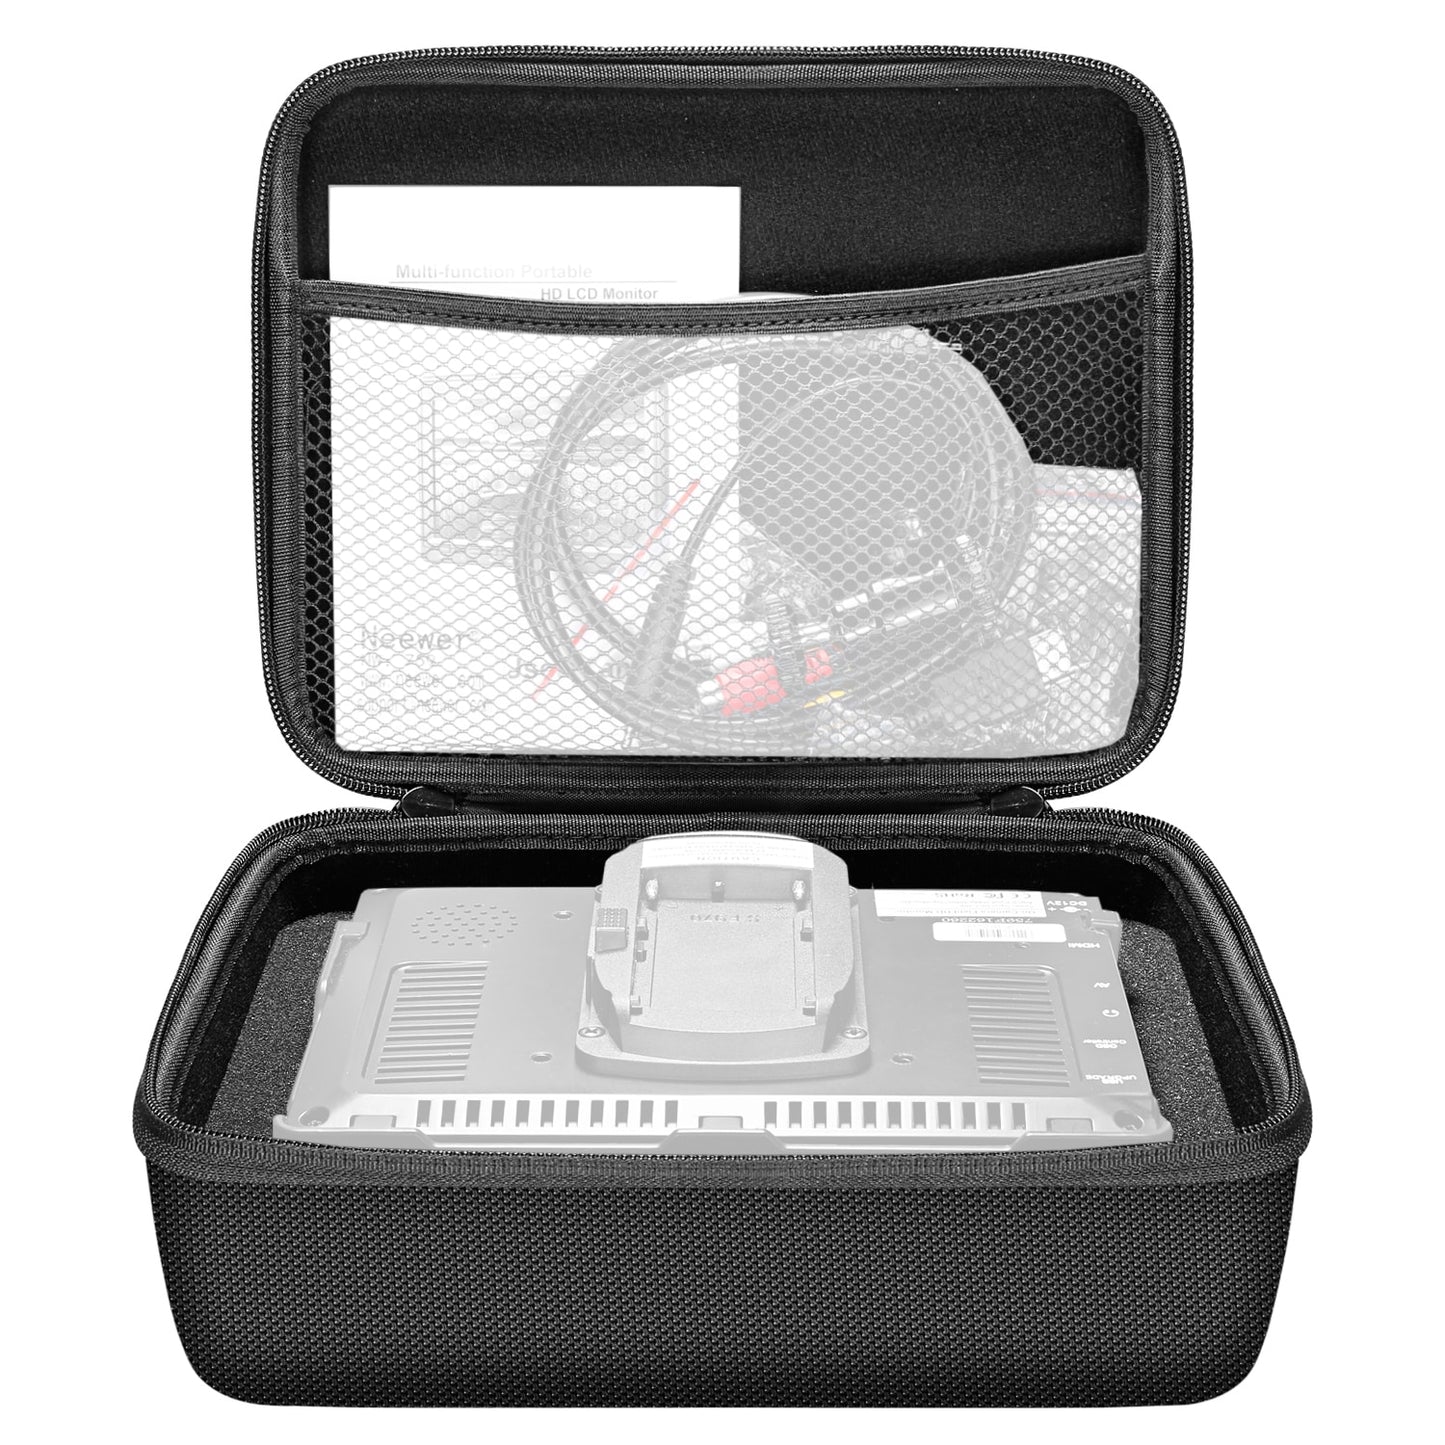 Neewer Portable EVA Monitor Carrying Case for Field monitor, Battery packs, Lights